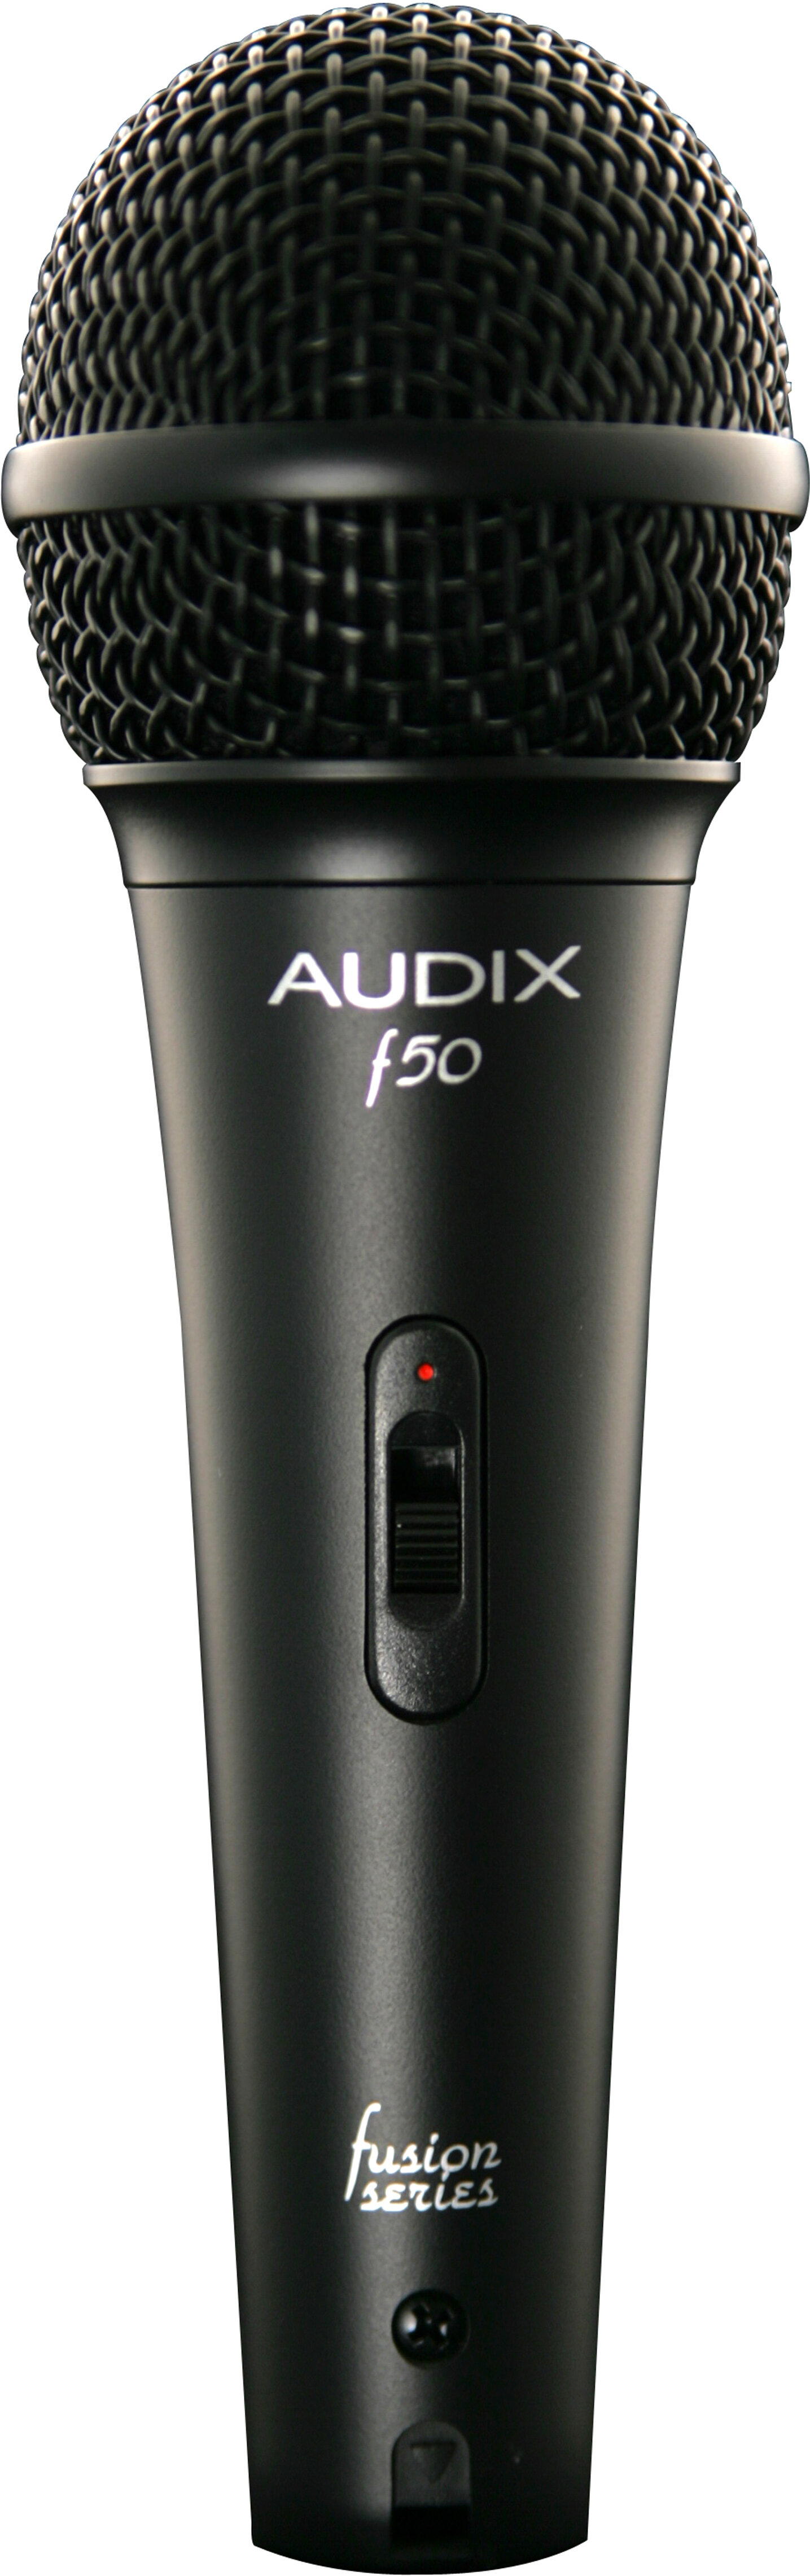 All Purpose Cardioid Dynamic Vocal Mic - Audix F50S